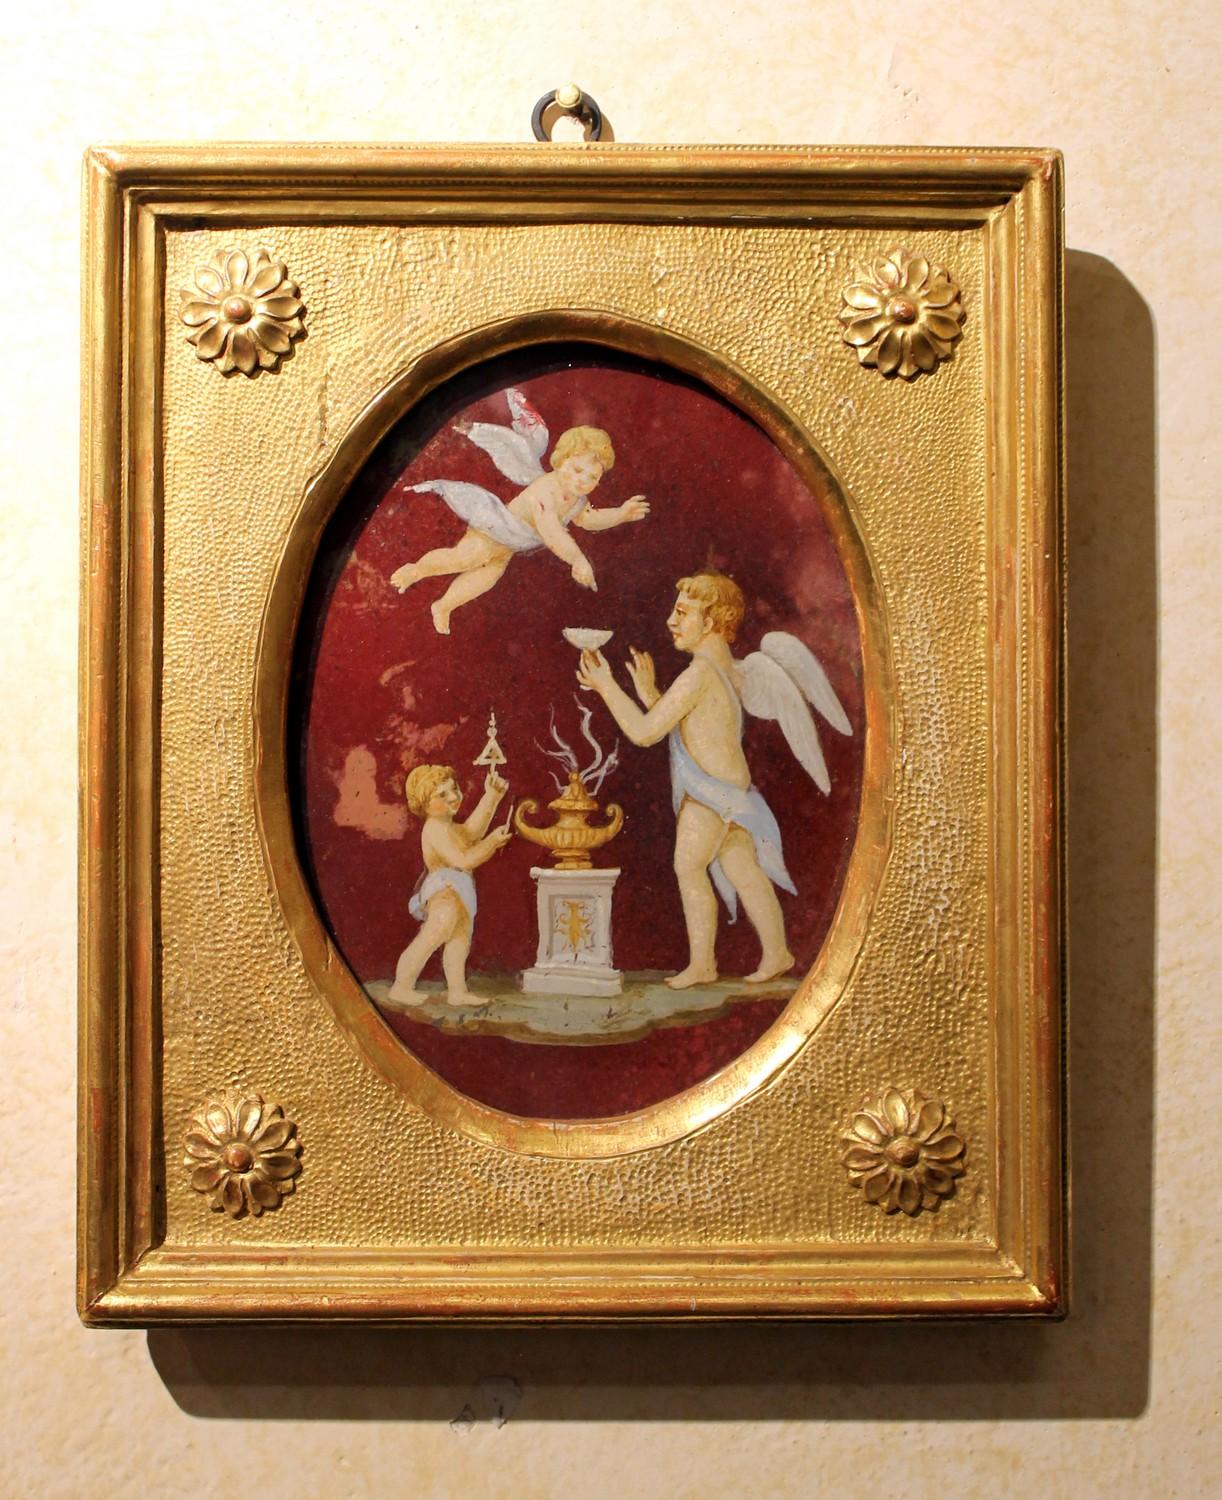 This lovely turn of the century Italian oil painting on glass features a Neoclassical scene with putto. 
The  winged cherubs and the architectural elements are rendered in soft pastel tones while the background is red. Both the color palette and the